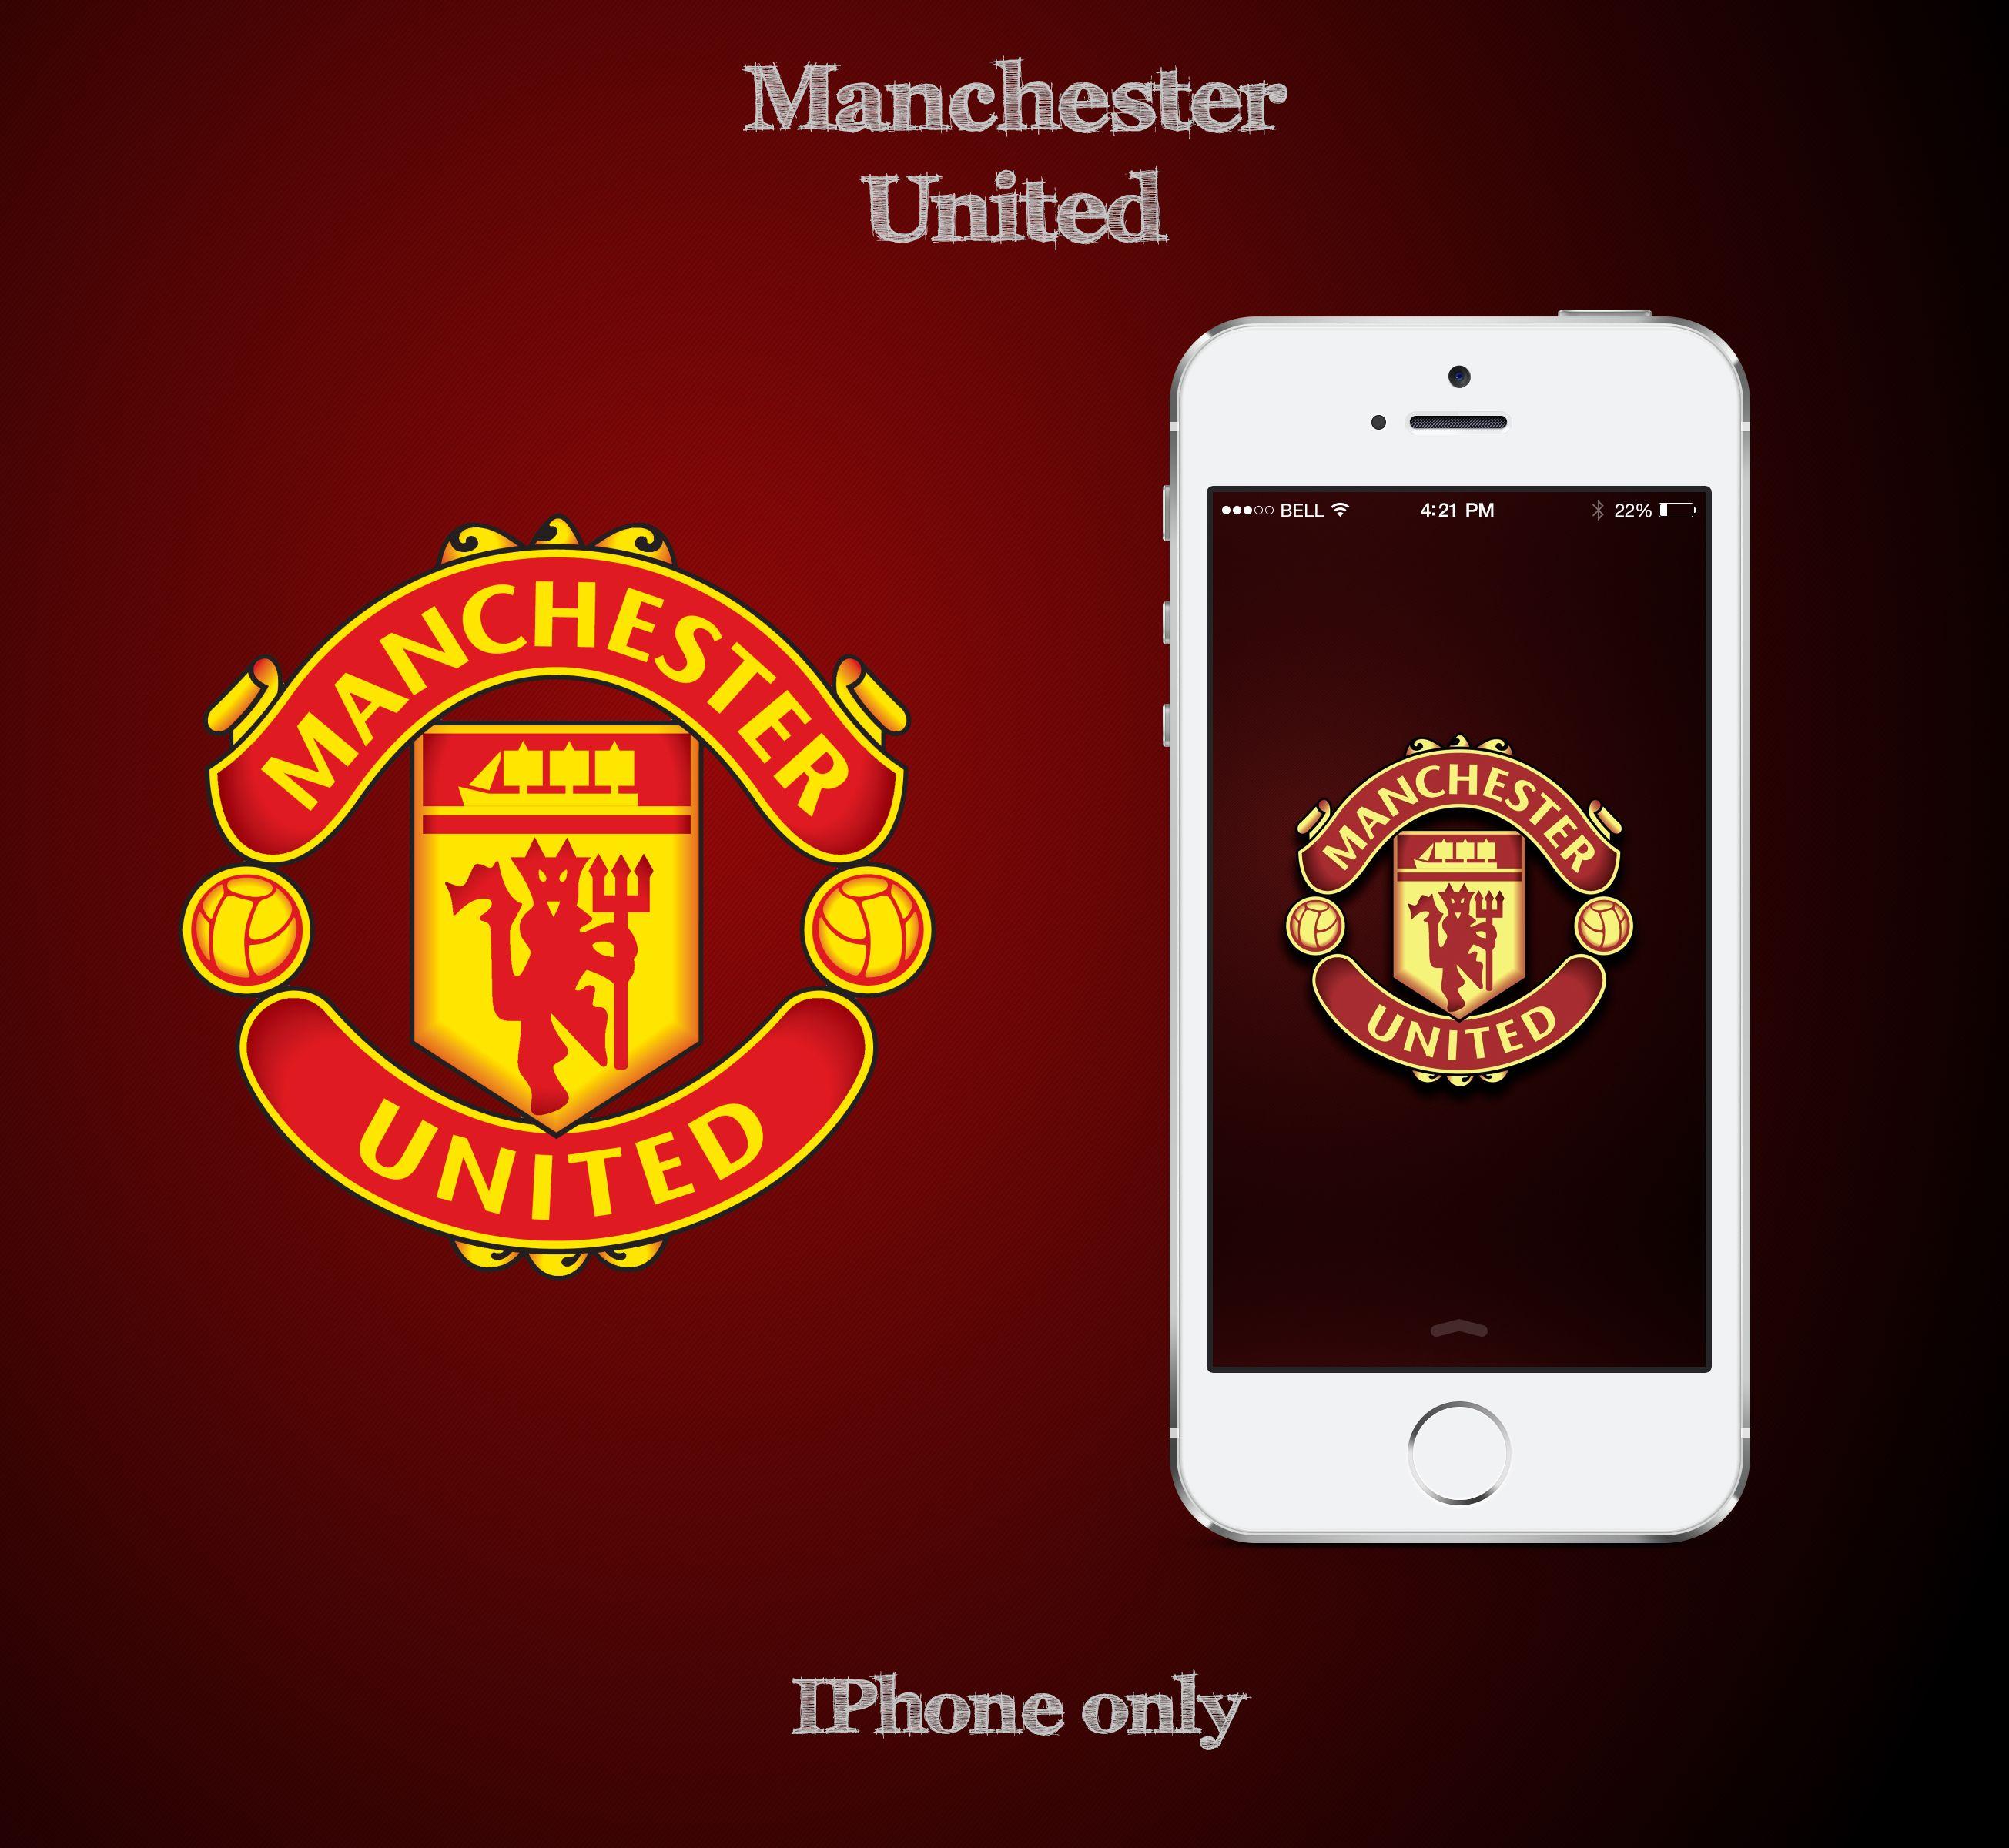 iphone 6 wallpaper manchester united